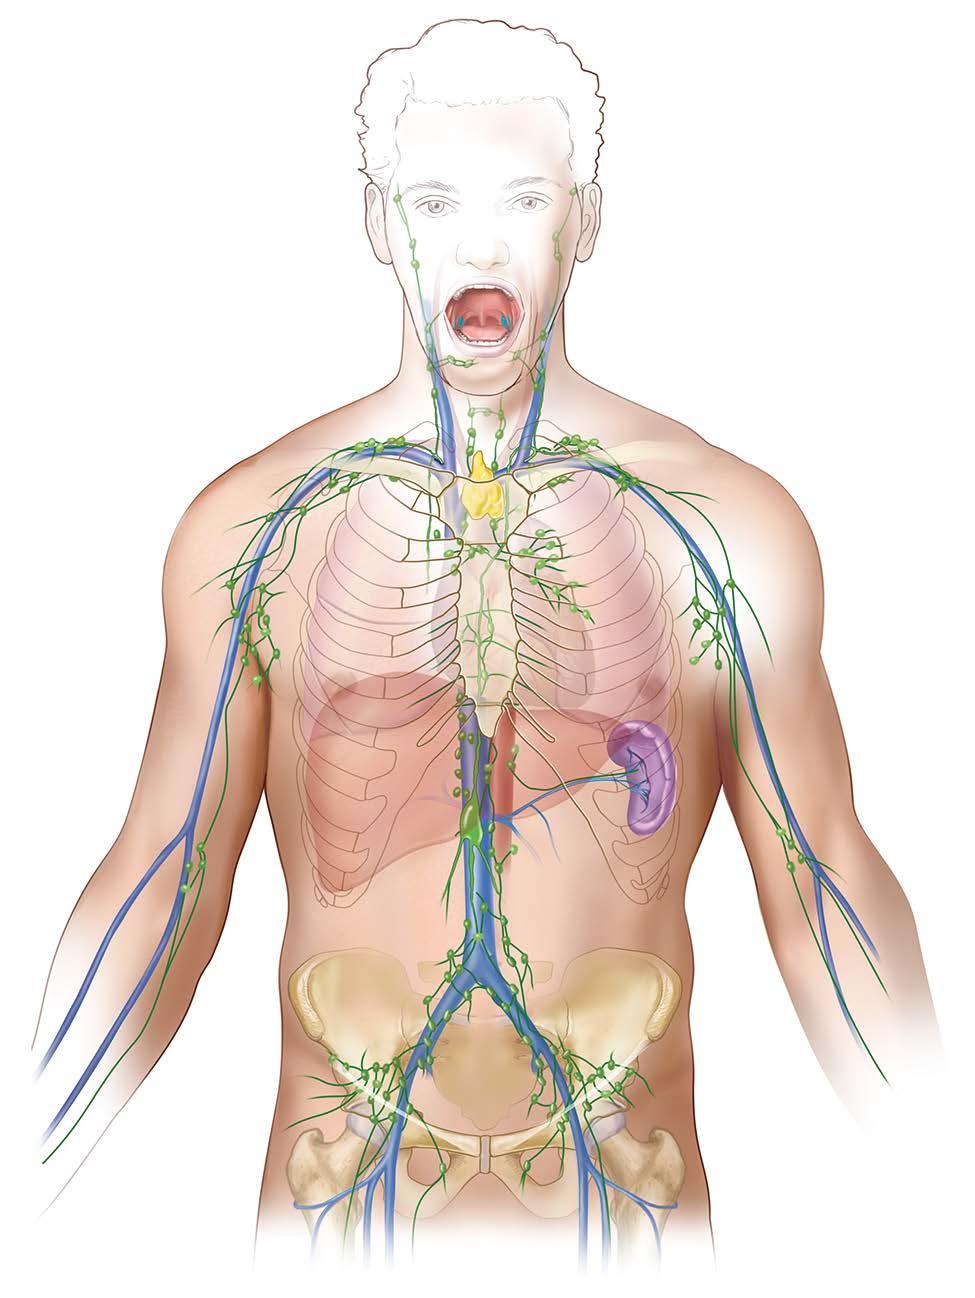 Thymus Tonsils Lymph node Lymph vessel Spleen This picture shows the